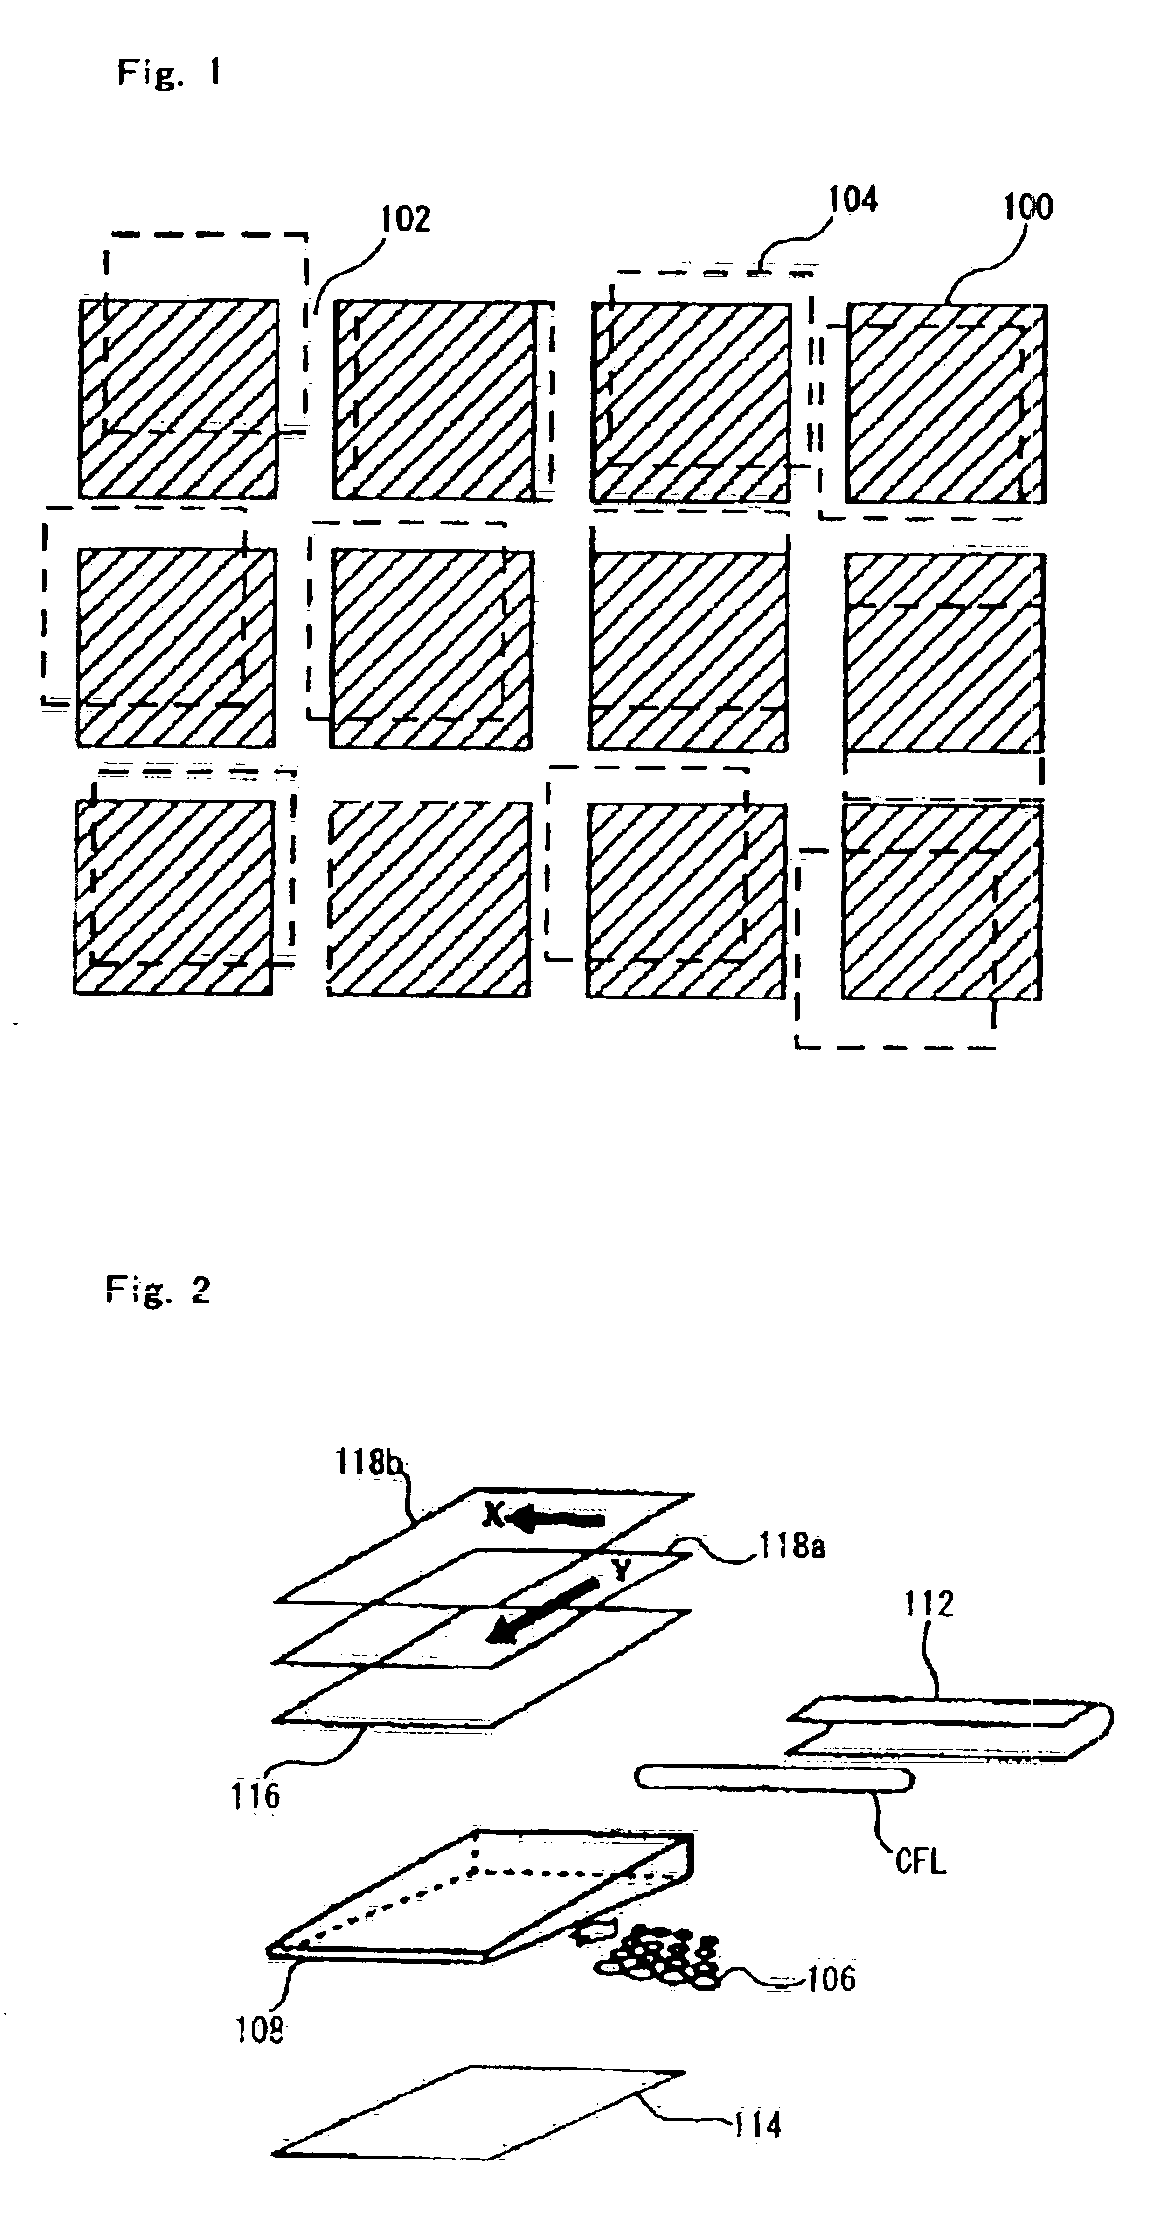 Discrete pattern, apparatus, method, and program storage device for generating and implementing the discrete pattern